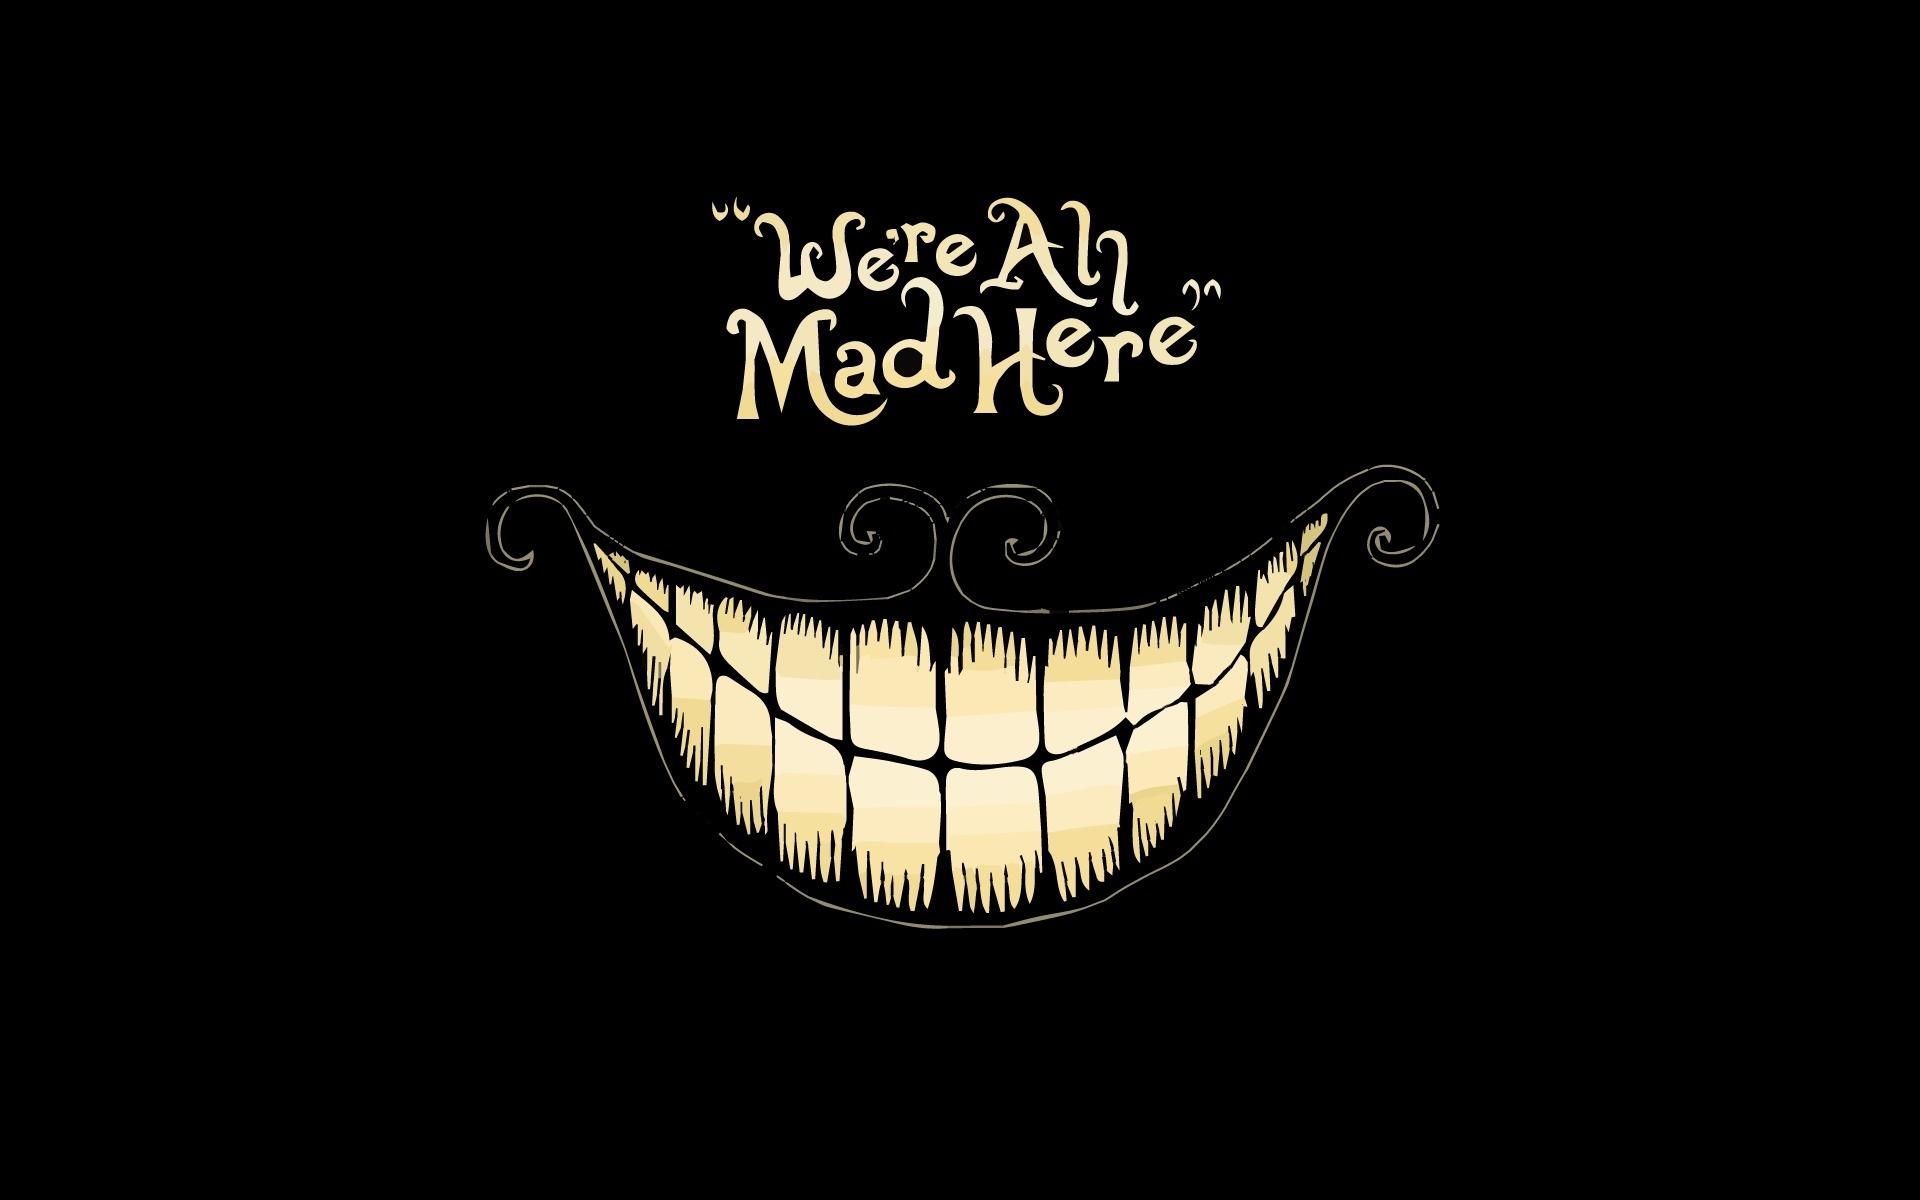 We're all mad here HD Wallpaper